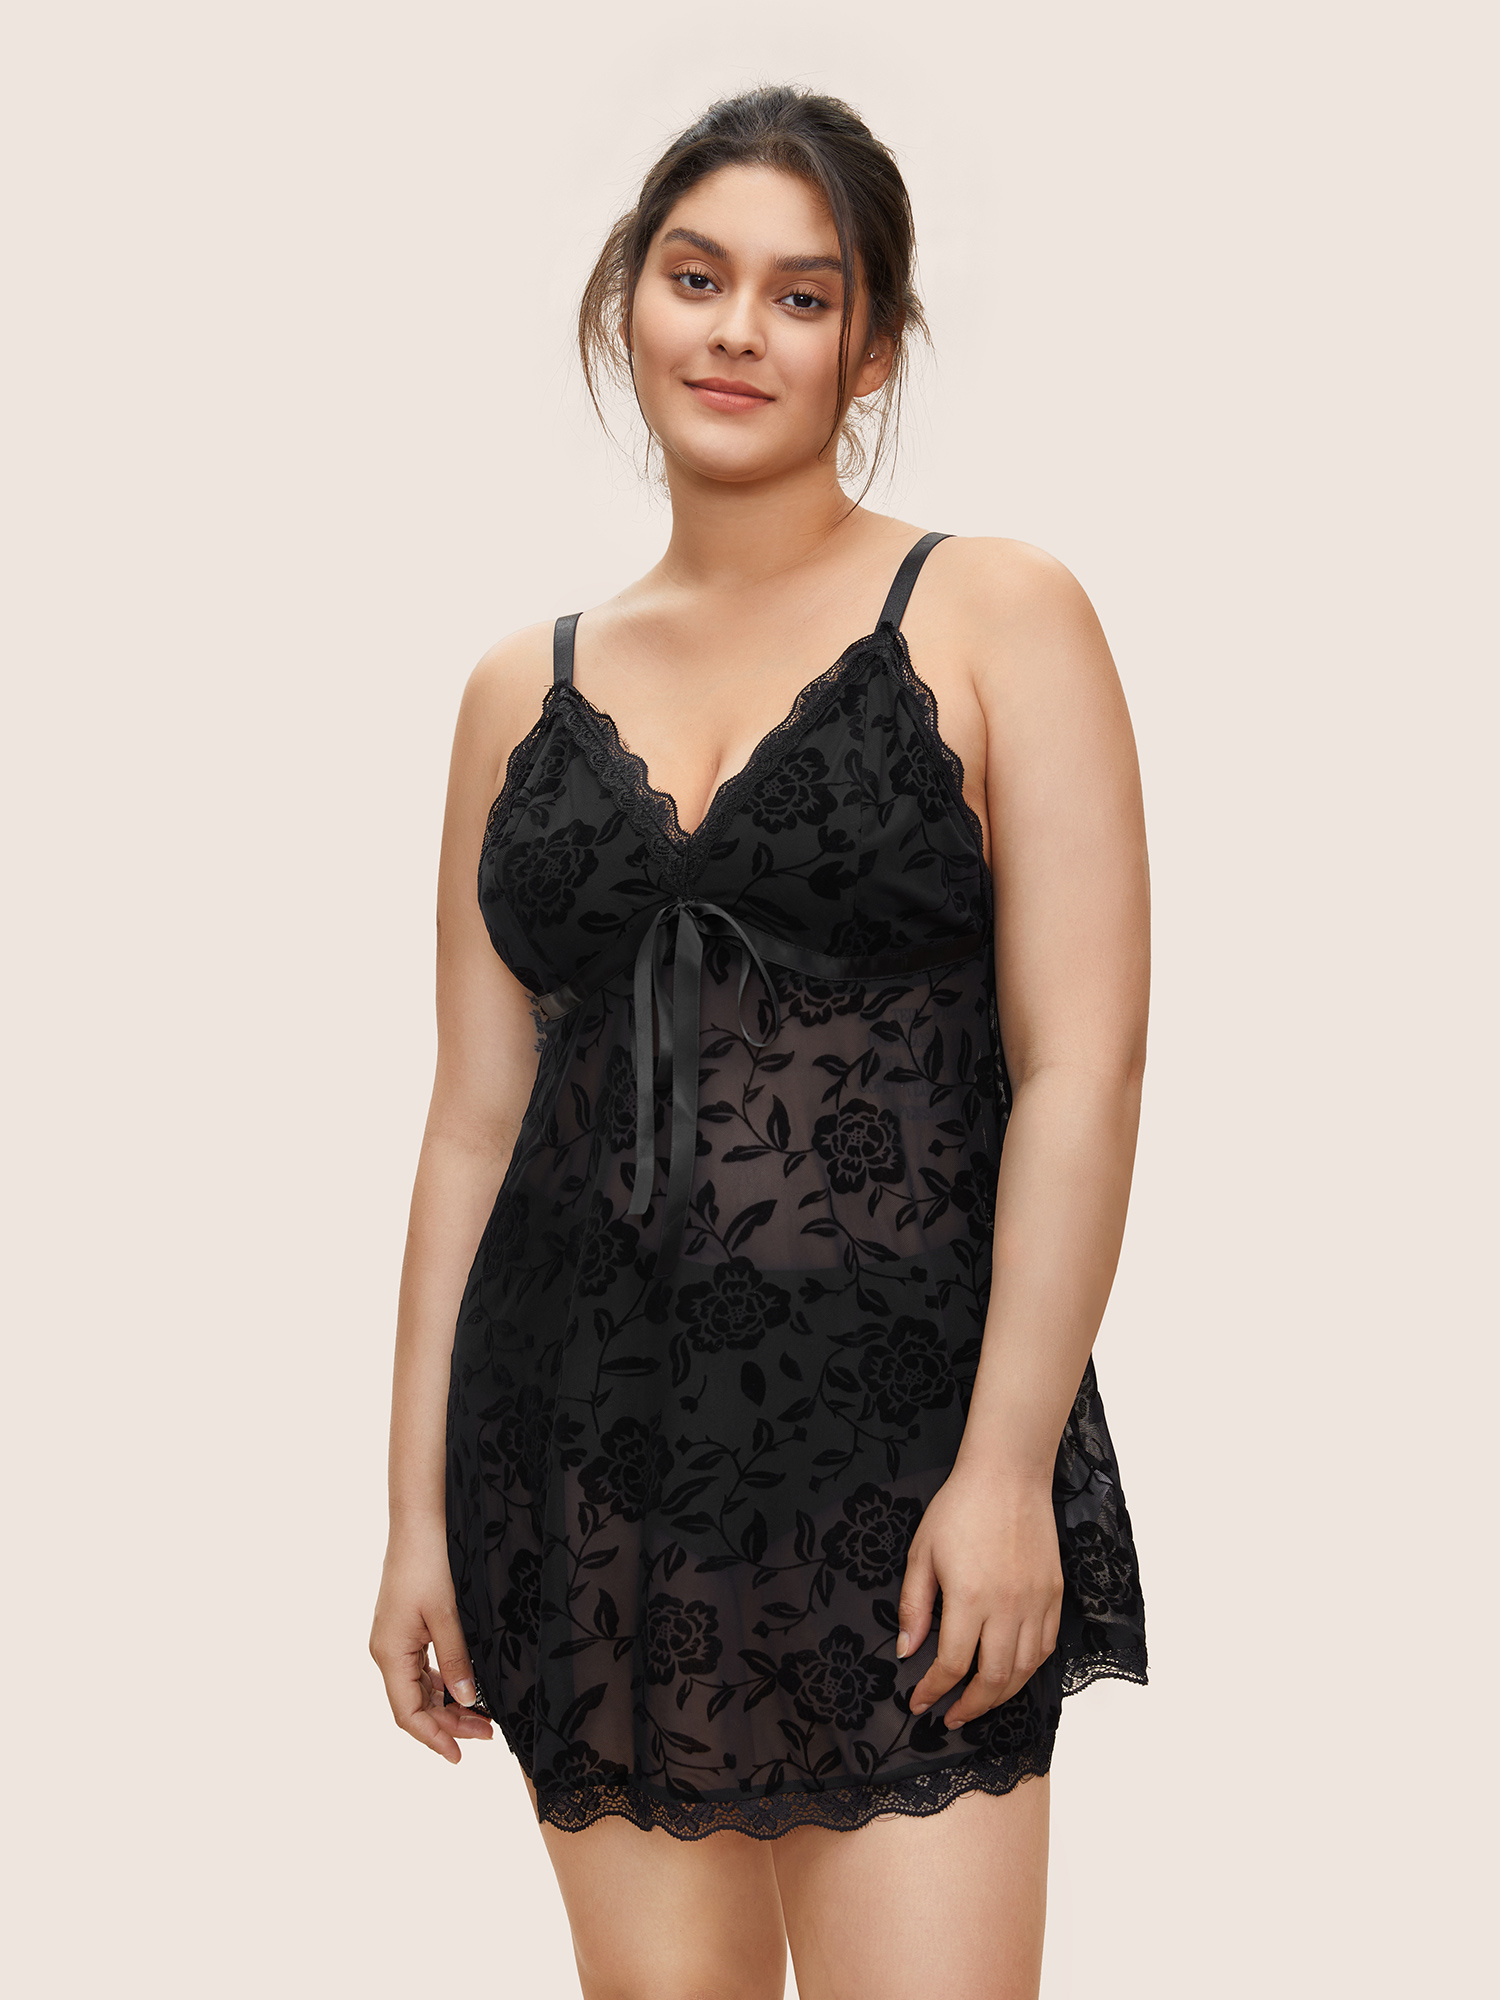 

Plus Size Silhouette Floral Print Lace Panel Bowknot Sleep Dress Black V-neck Lounge Everyday  Bloomchic